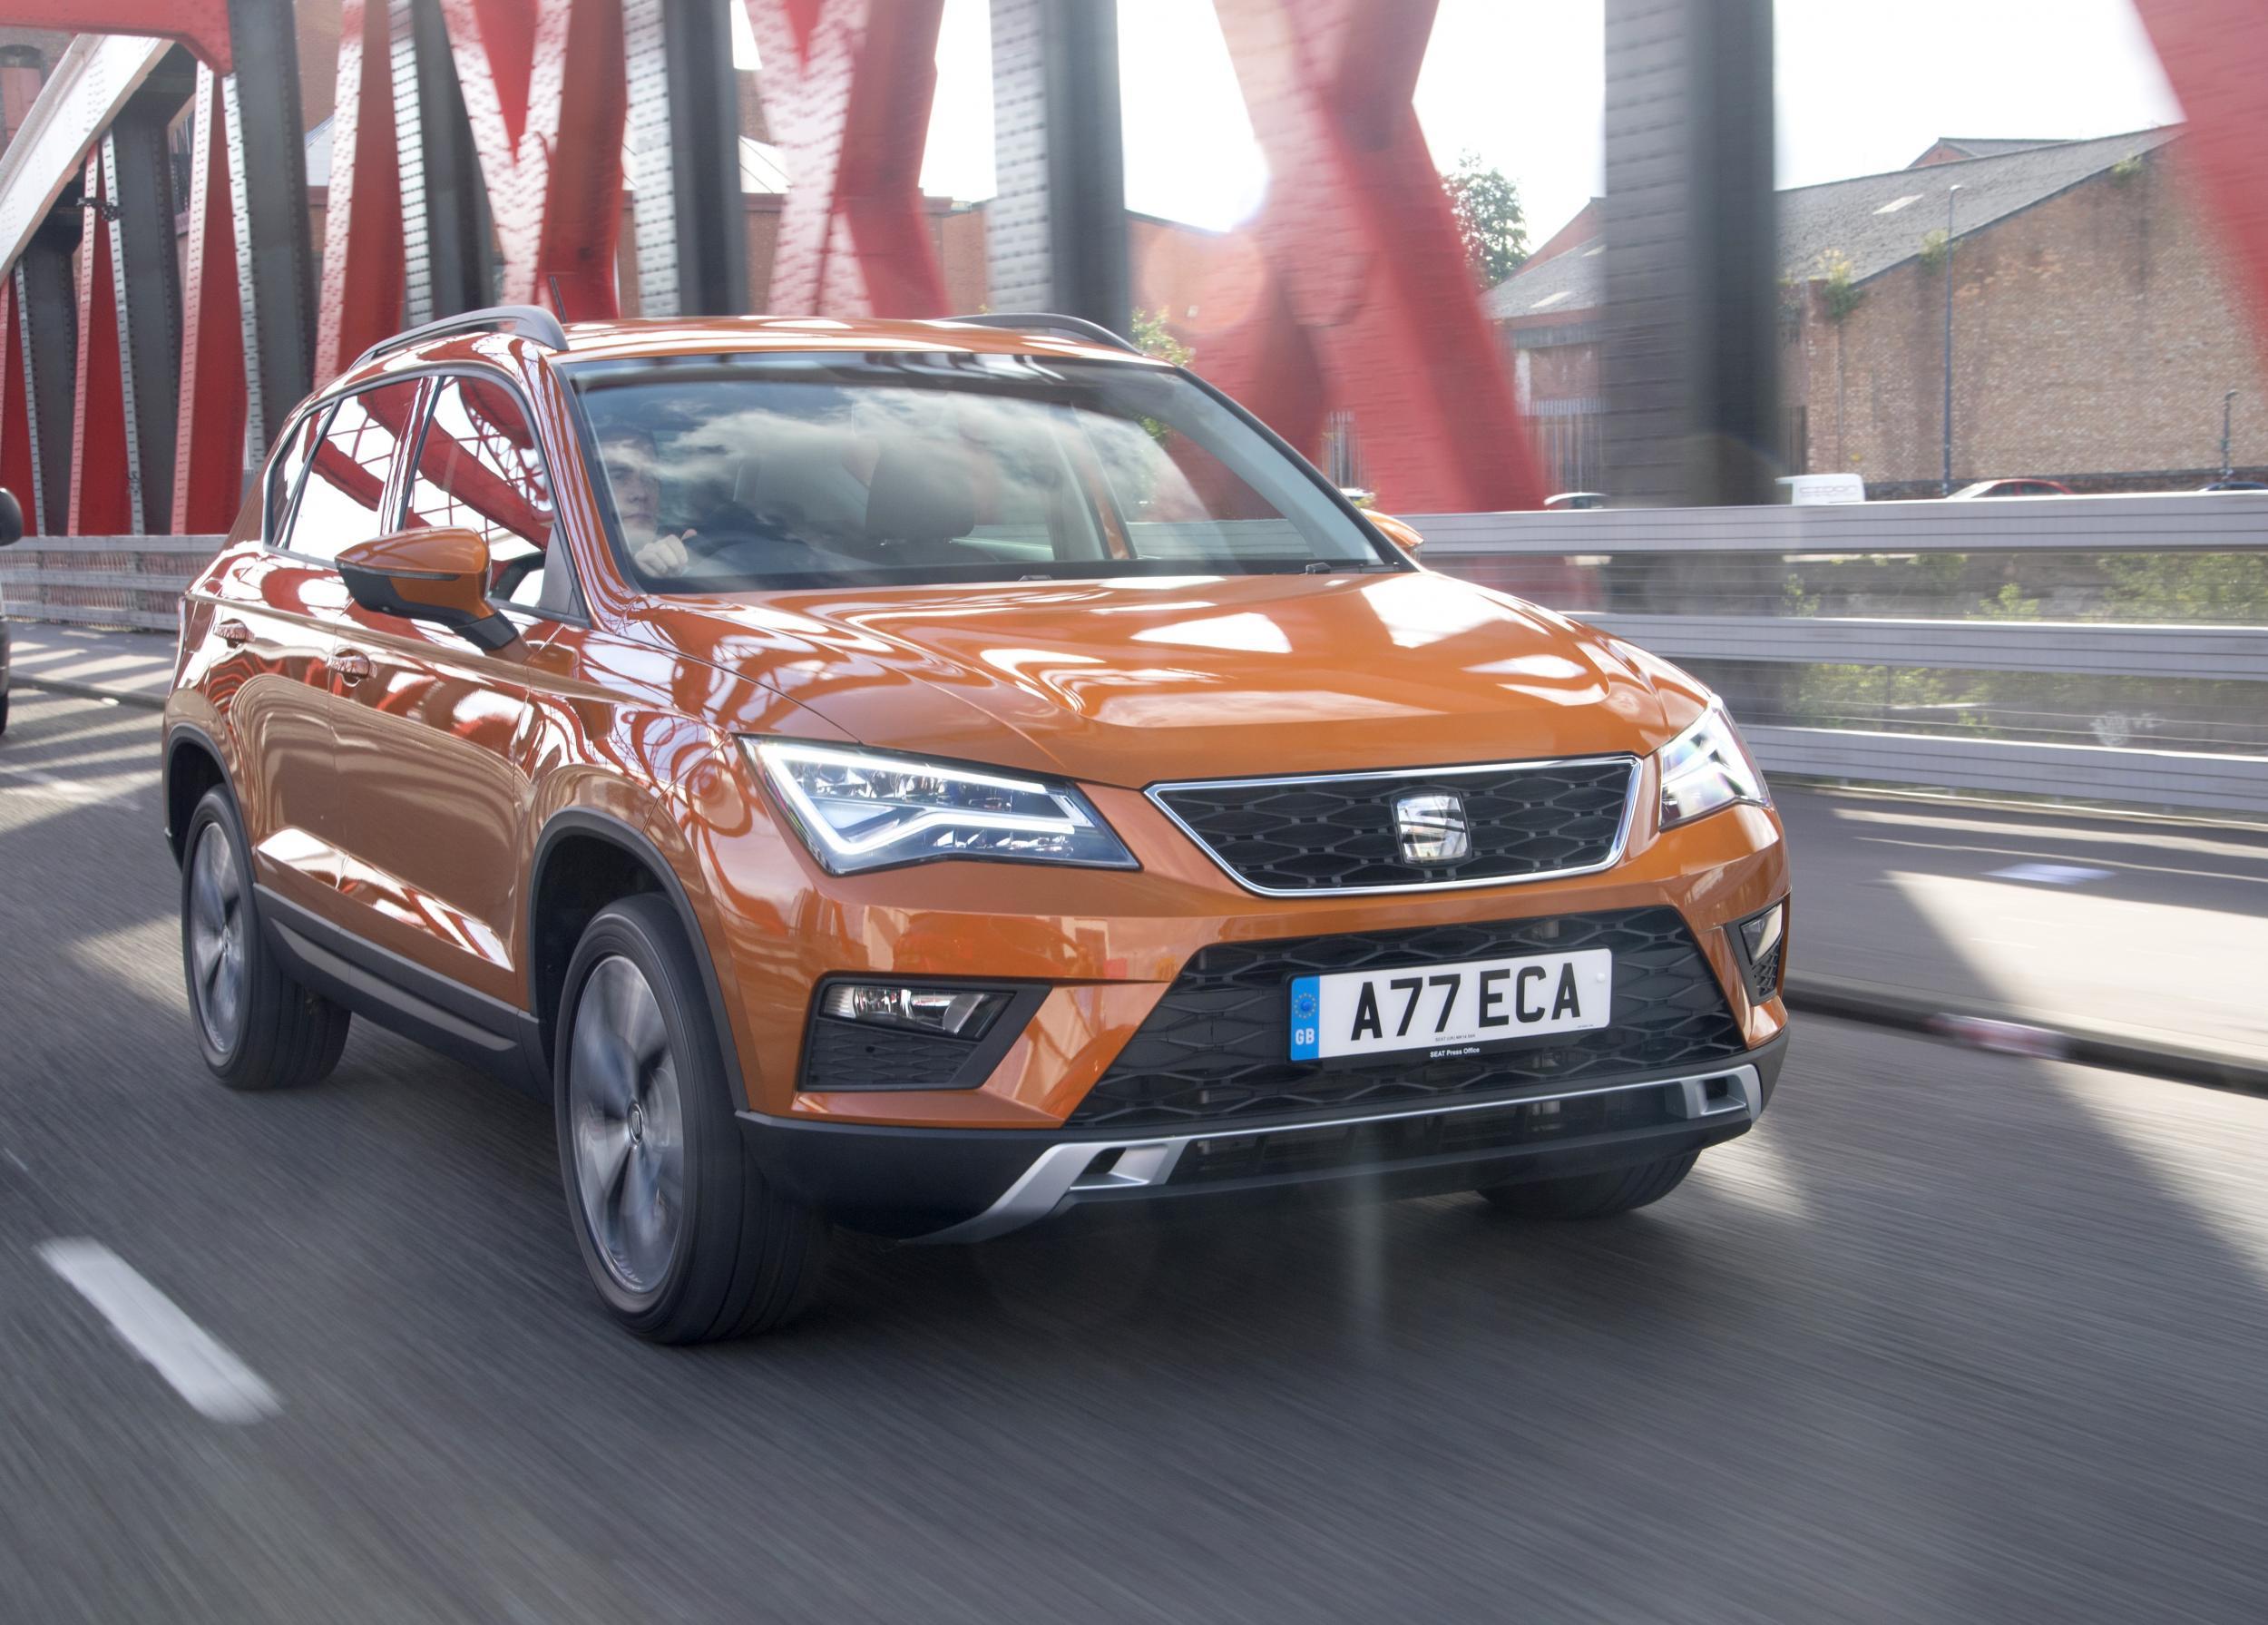 The Ateca is sharply styled in its 'Samoa orange' livery and 18" alloy wheels